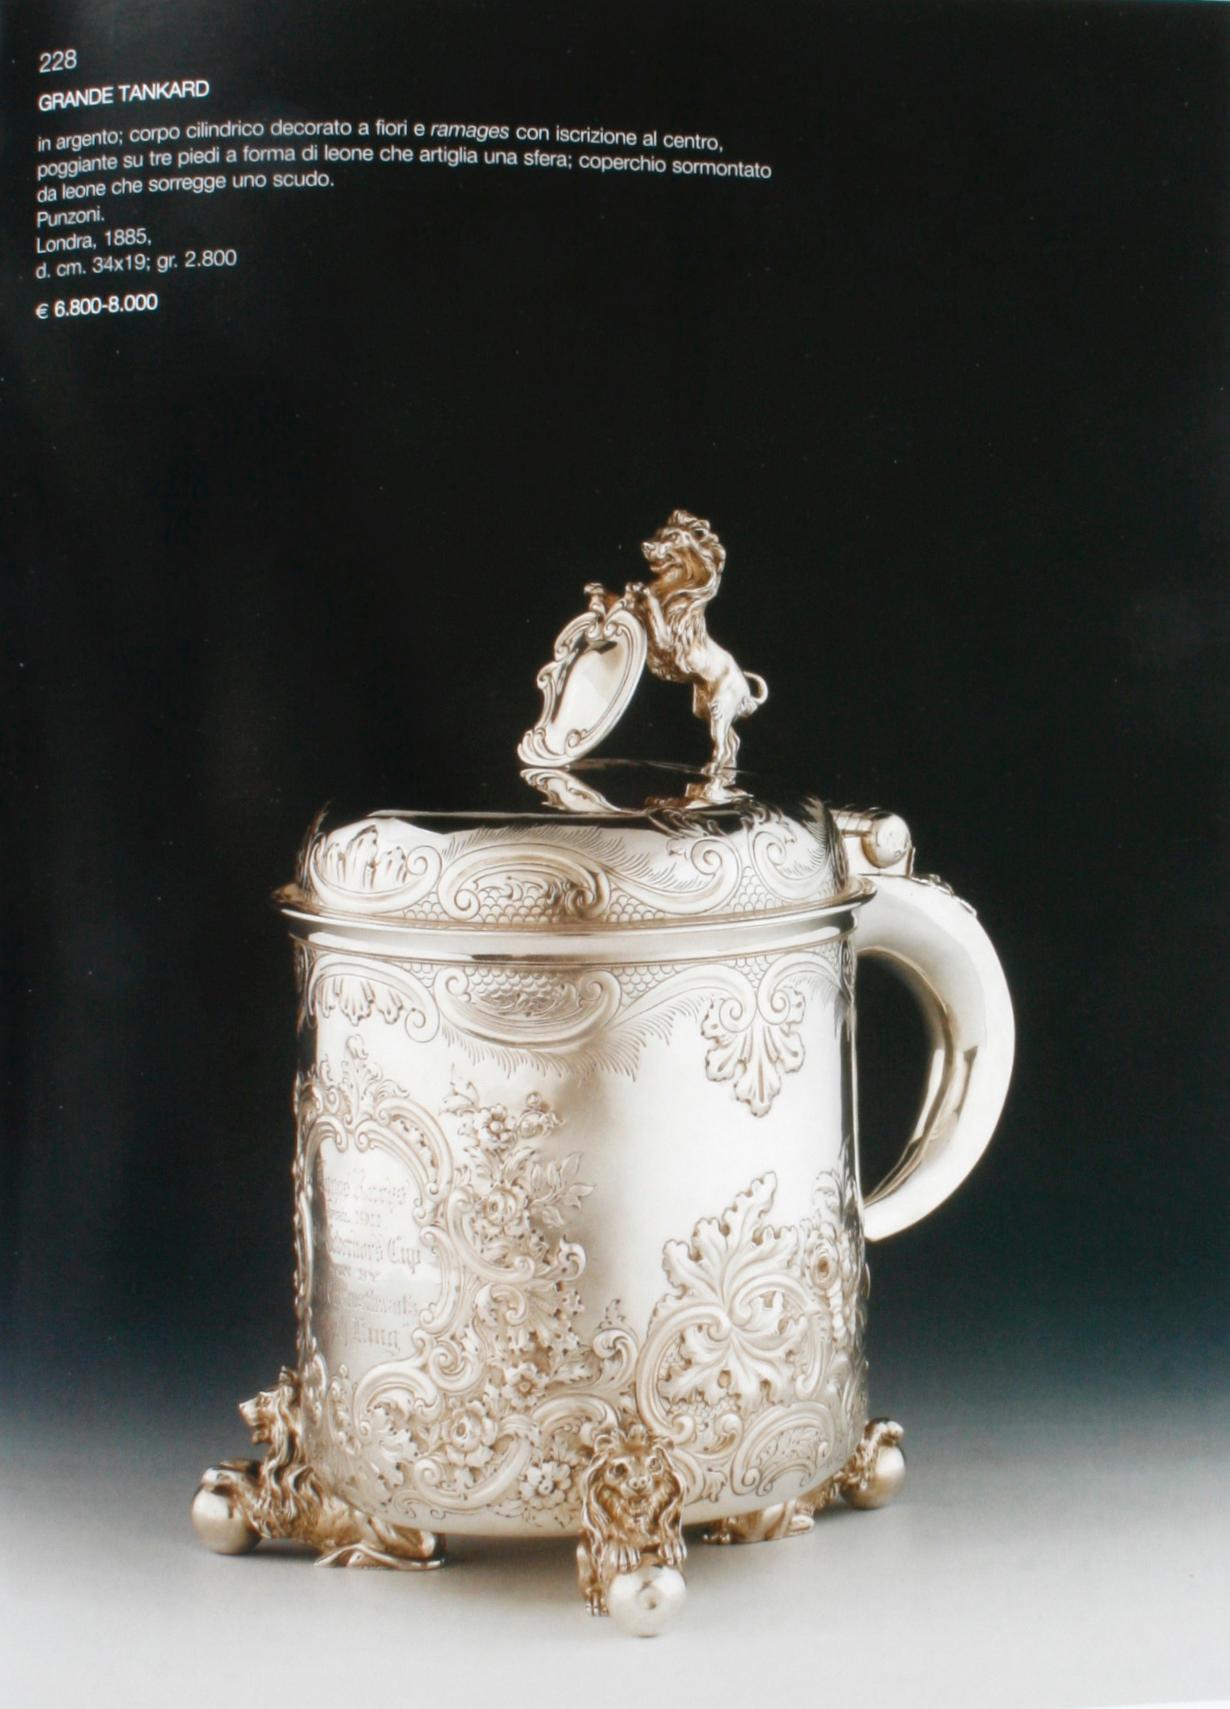 Auction Catalogue of Italian Fine Art, Silver, Ivory, and Venetian Objects, 2006 For Sale 9